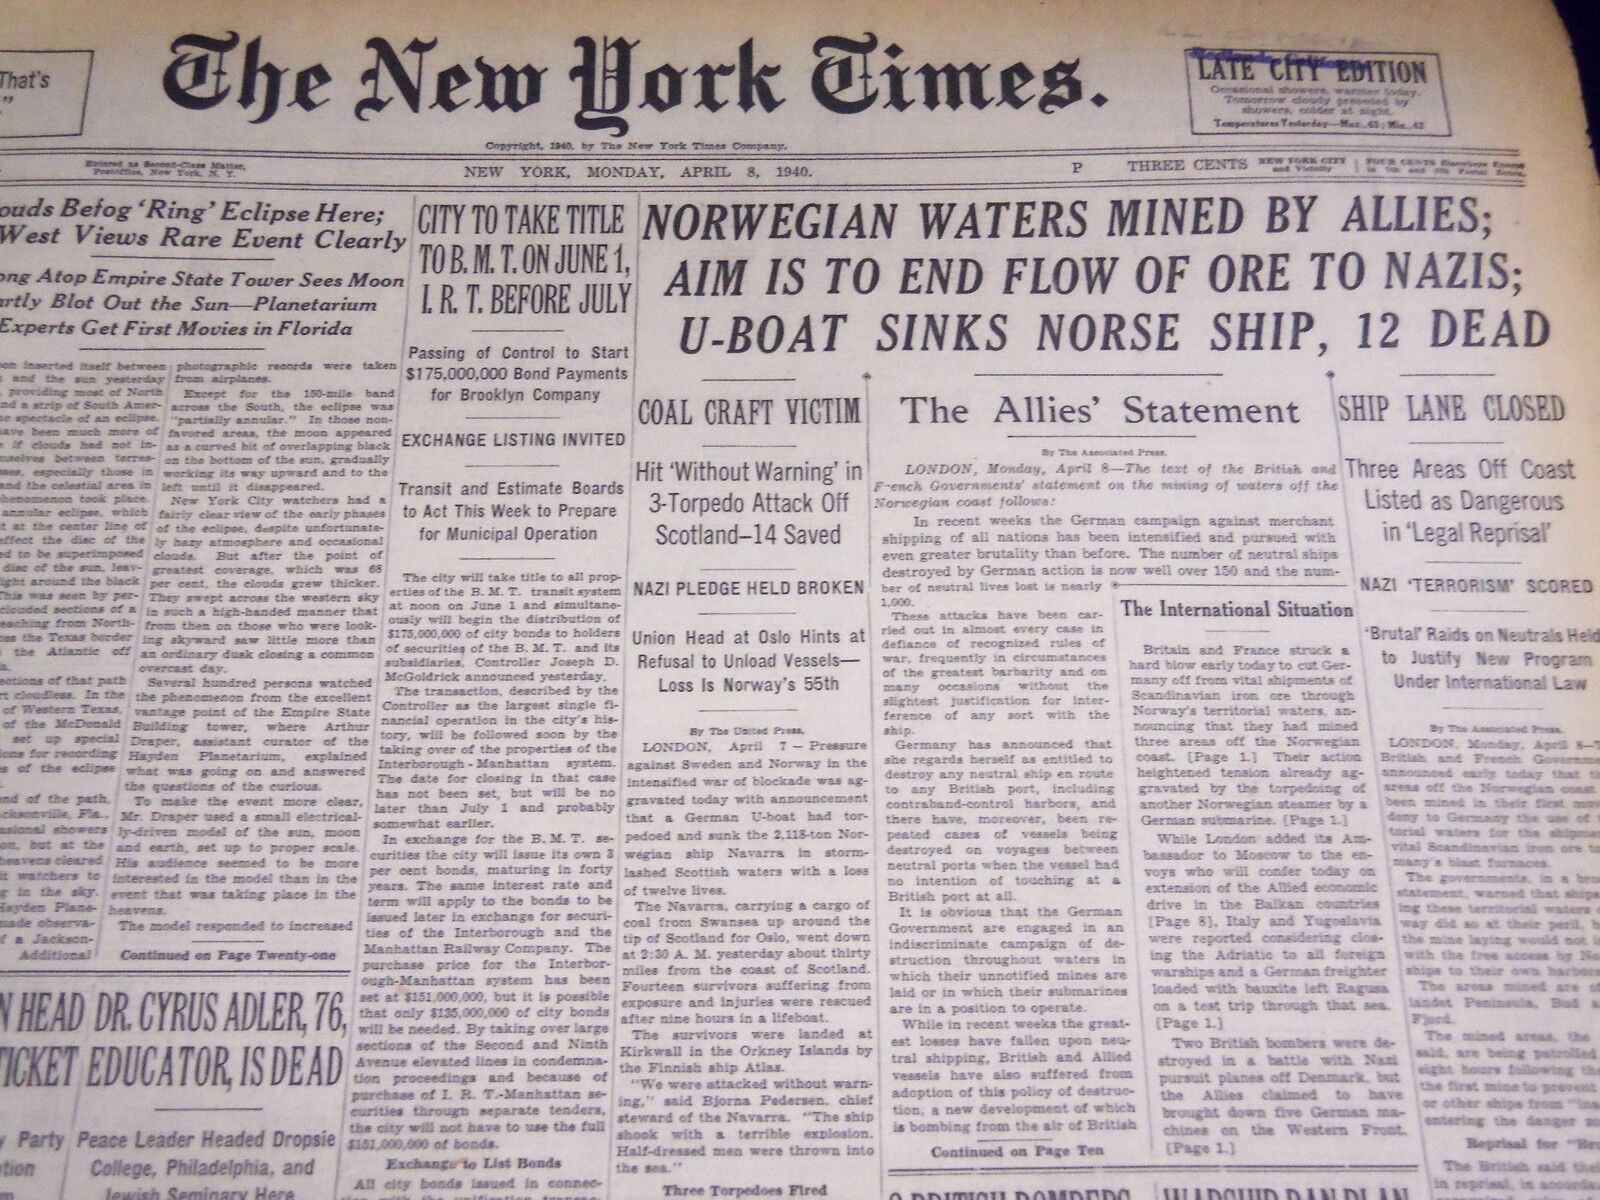 1940 APRIL 8 NEW YORK TIMES - NORWEGIAN WATERS MINED - NT 2897